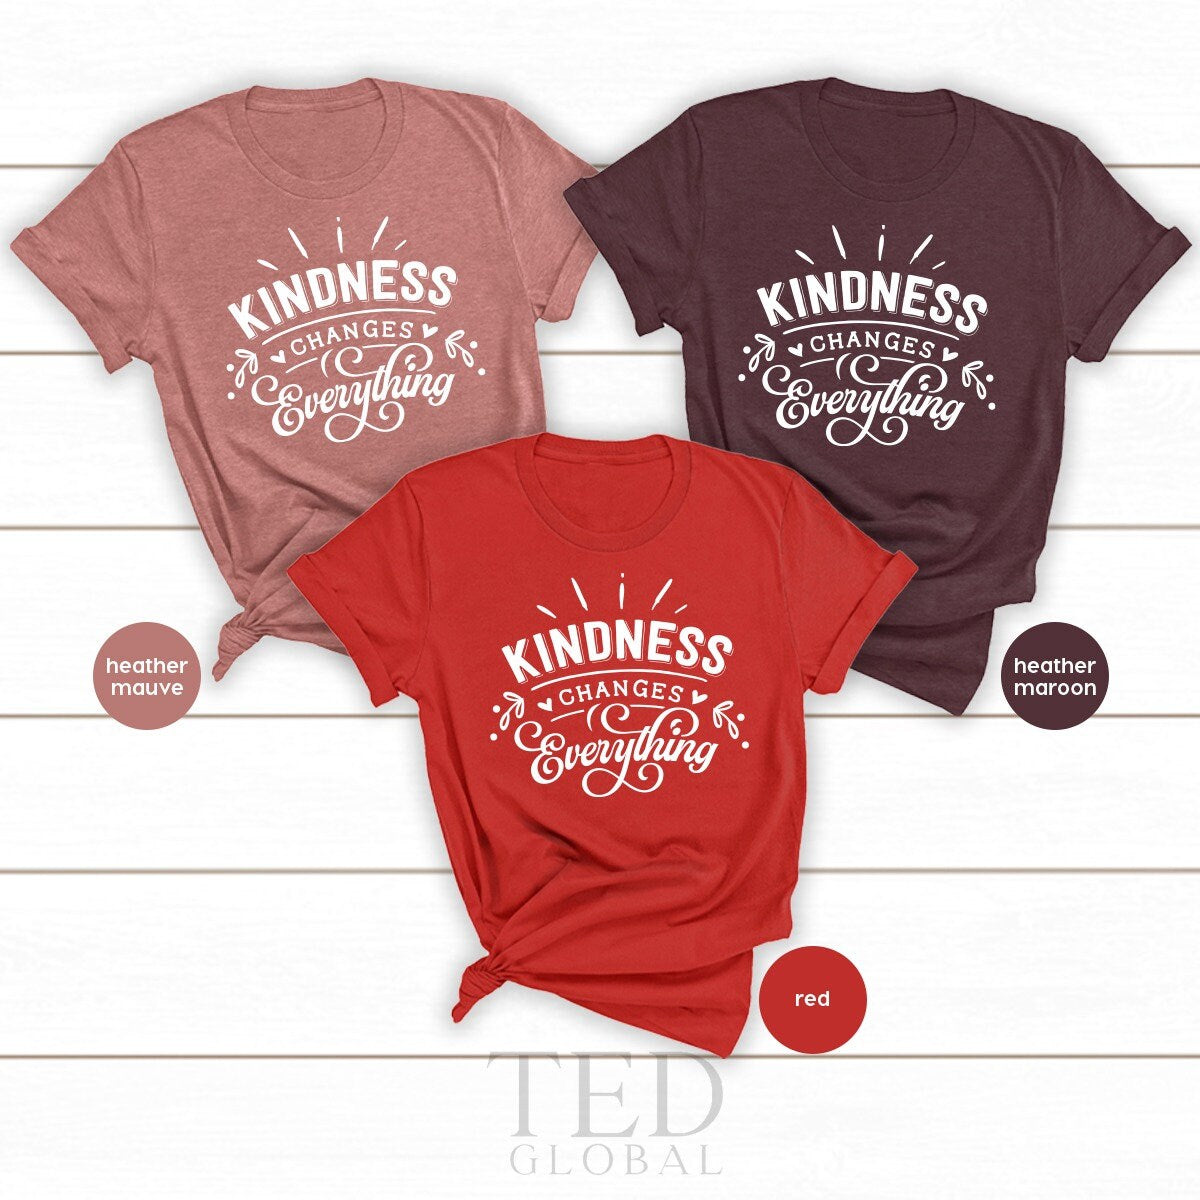 Kindness Changes Everything Shirt, Be Kindness Shirt, Cute Kindness Shirt, Be Nice Shirt, Funny Shirt, Kindness Shirt, Teachers Shirt - Fastdeliverytees.com